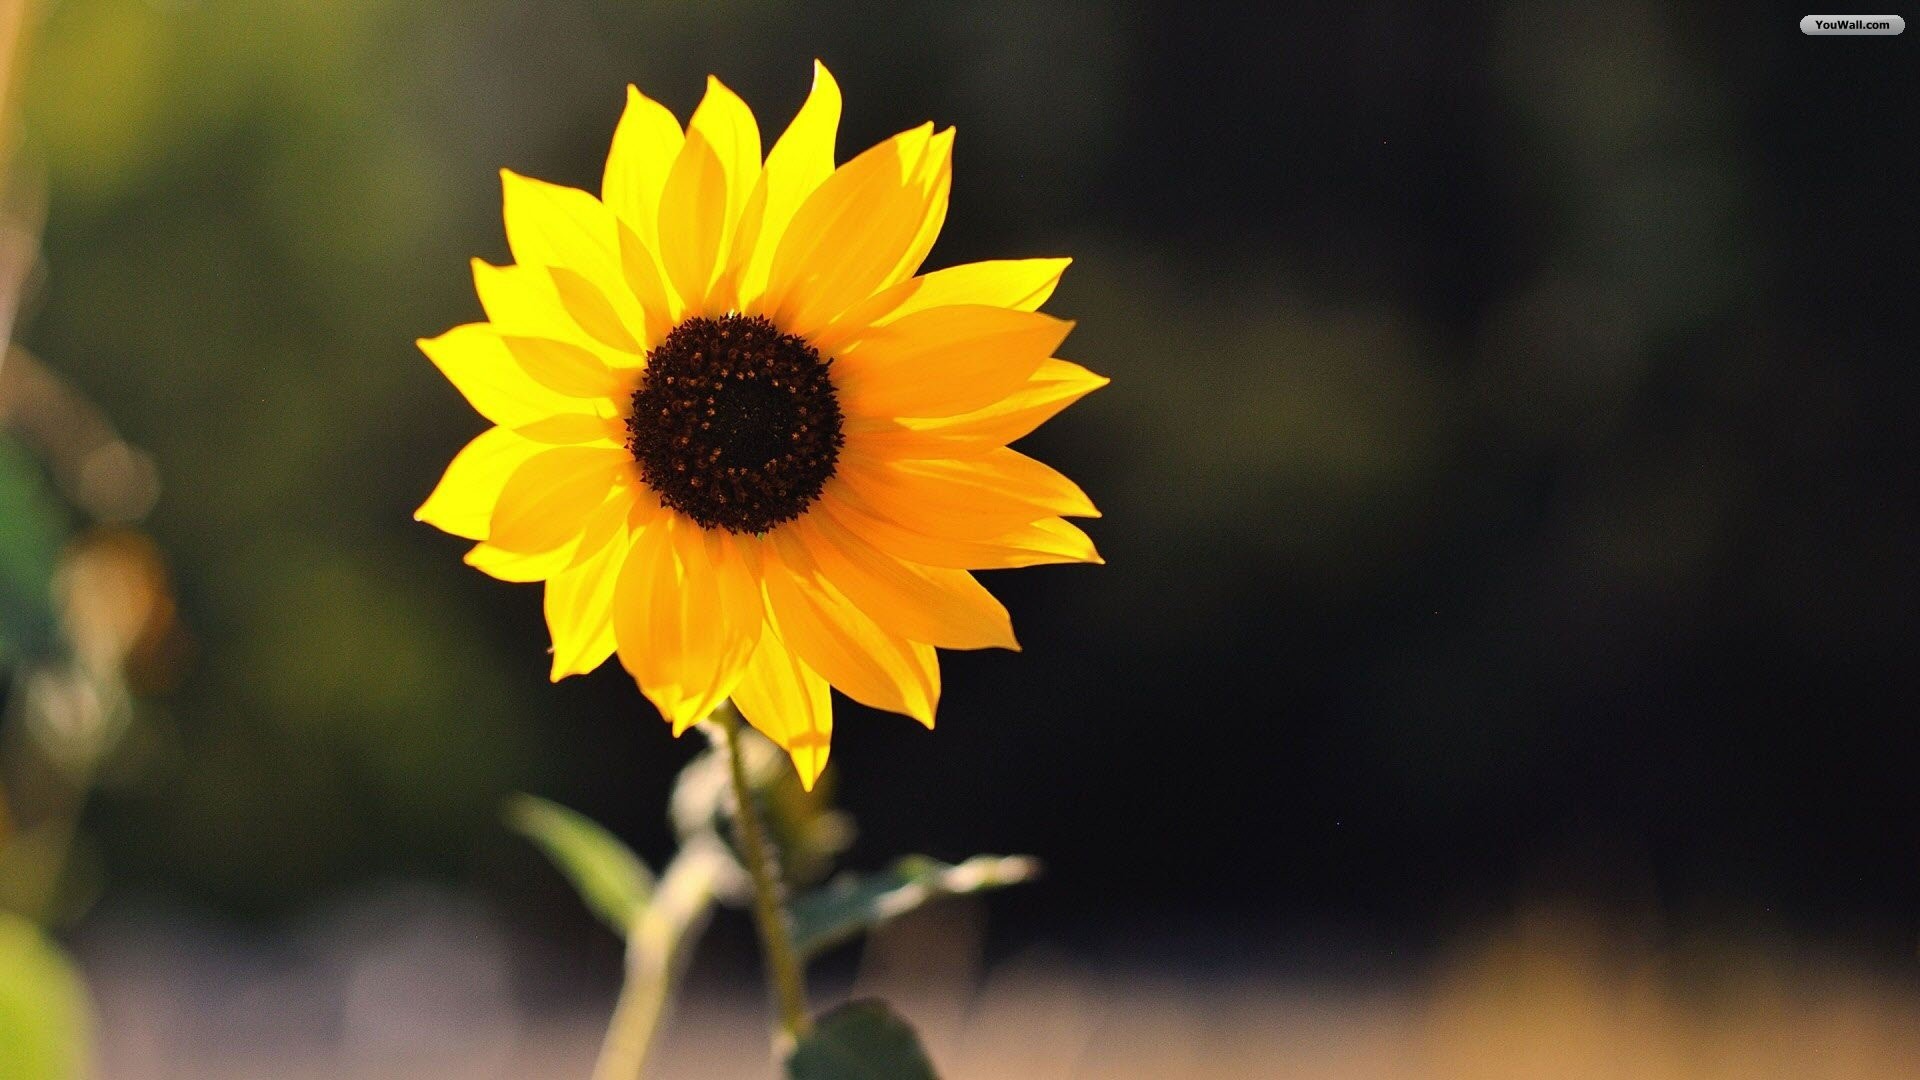 1920x1080 Sunflower Wallpapers High Quality Resolution